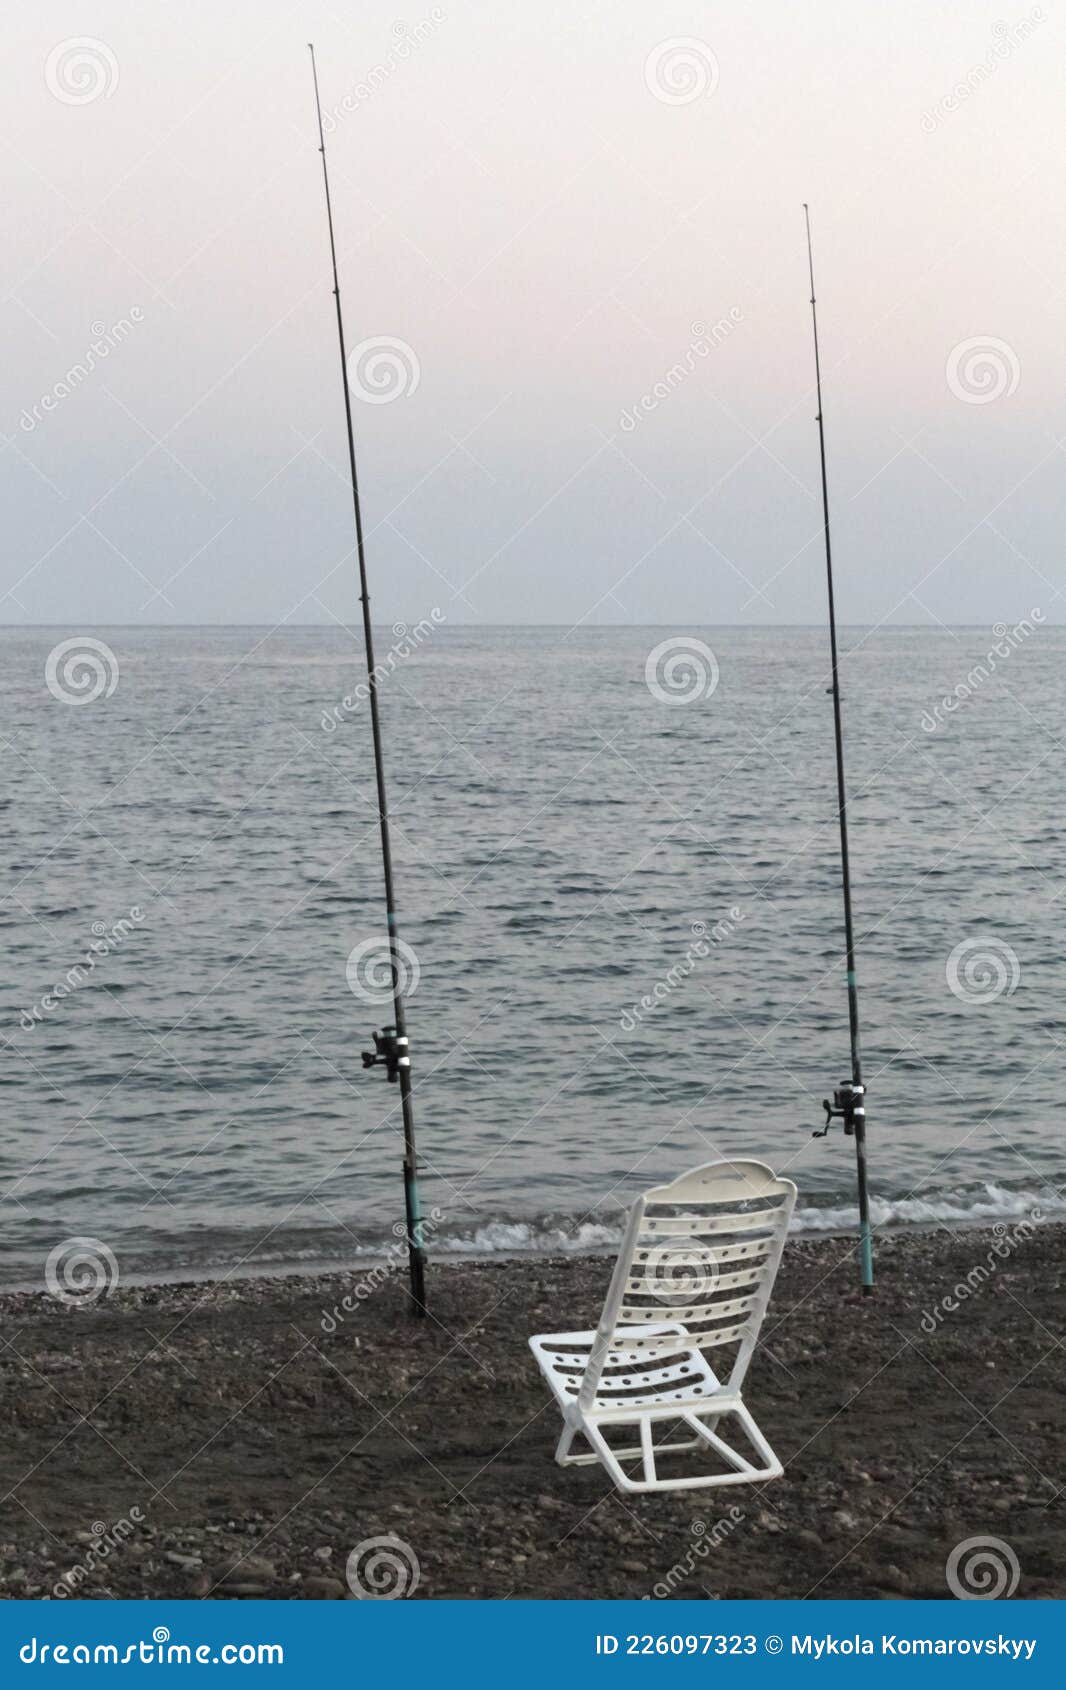 Beach Chair with Fishing Rods Stock Image - Image of water, equipment:  226097323